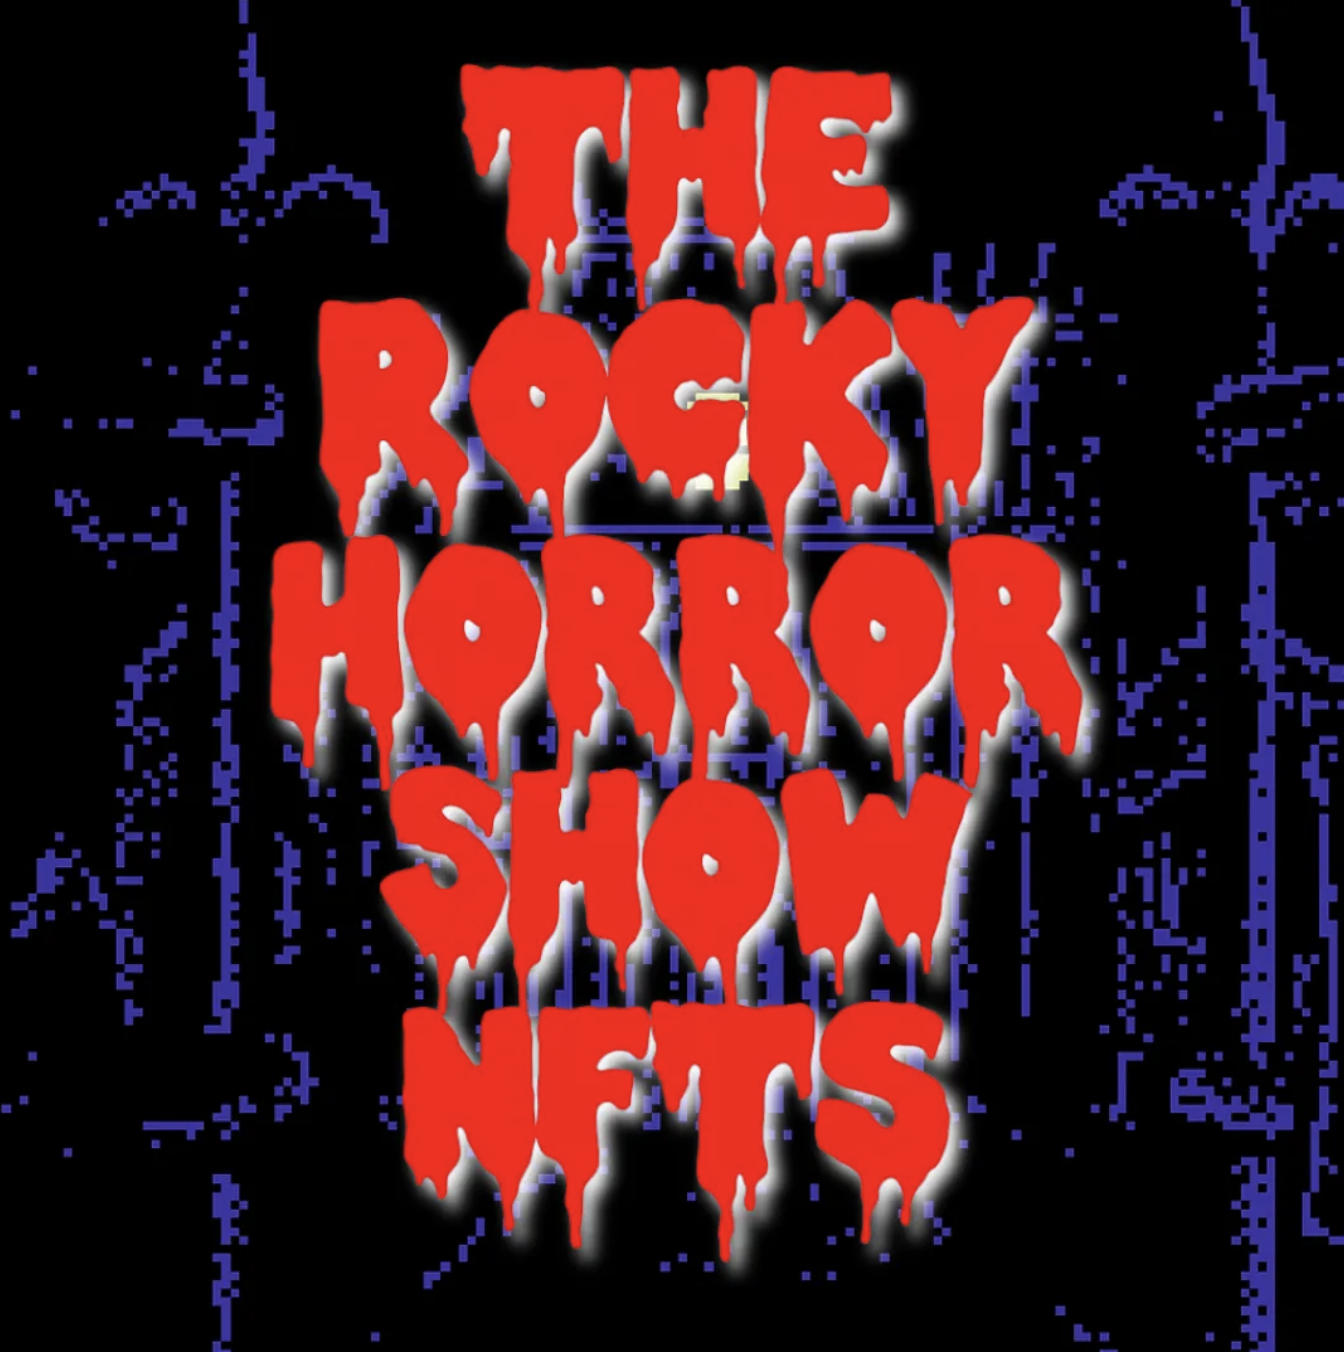 ‘The Rocky Horror Show’ marks 50 years of TimeWarp NFT launch